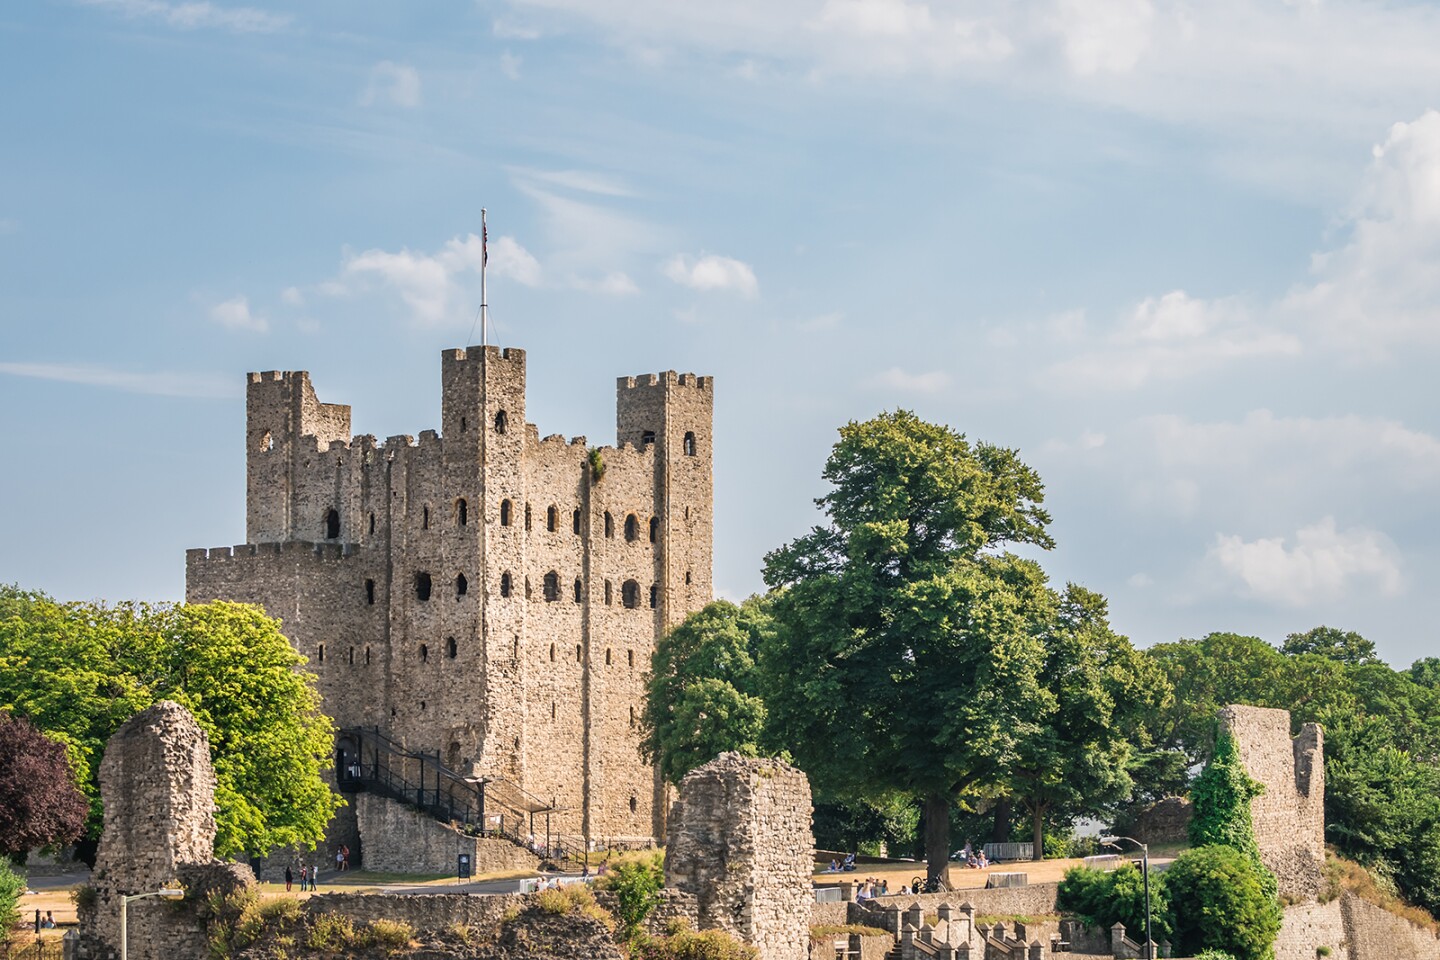 <h2>11. Rochester Castle</h2> <p><i>Rochester, England</i></p> <p> The 12th-century <a class="Link" href="https://www.visitmedway.org/attractions/rochester-castle-2436/" rel="noopener">Rochester Castle</a>, located in the county of Kent in southeast England, is very much in ruins, having withstood multiple sieges during its long history. Though the original 113-foot-high keep still stands, the rest of its vast interior is roofless. Pick up an audio tour for context, then roam atop the ancient battlements, which offer lovely views of the cobbled streets of Rochester and the Medway River below; parts of the crenellated curtain wall surrounding the castle date back to the late 11th century.</p> <h3>How to visit Rochester Castle</h3> <p>It’s a speedy 40-minute train ride to Rochester from <a class="Link" href="https://www.afar.com/travel-guides/united-kingdom/london/guide" rel="noopener">London</a>’s St. Pancras station, and the castle is a 10-minute walk from there.</p>